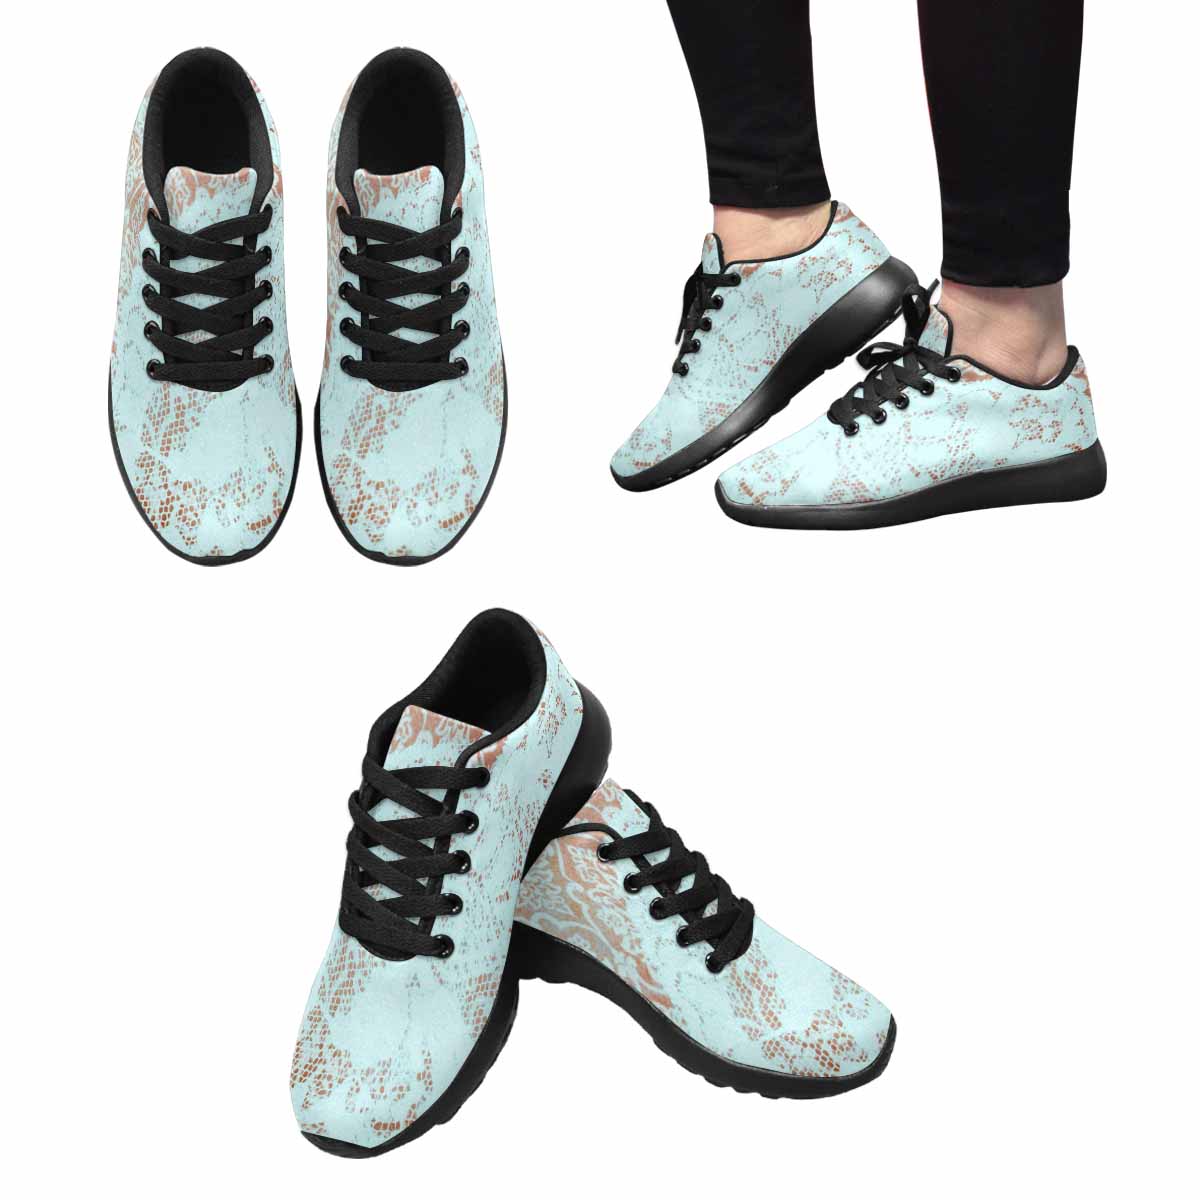 Victorian lace print, womens cute casual or running sneakers, design 23